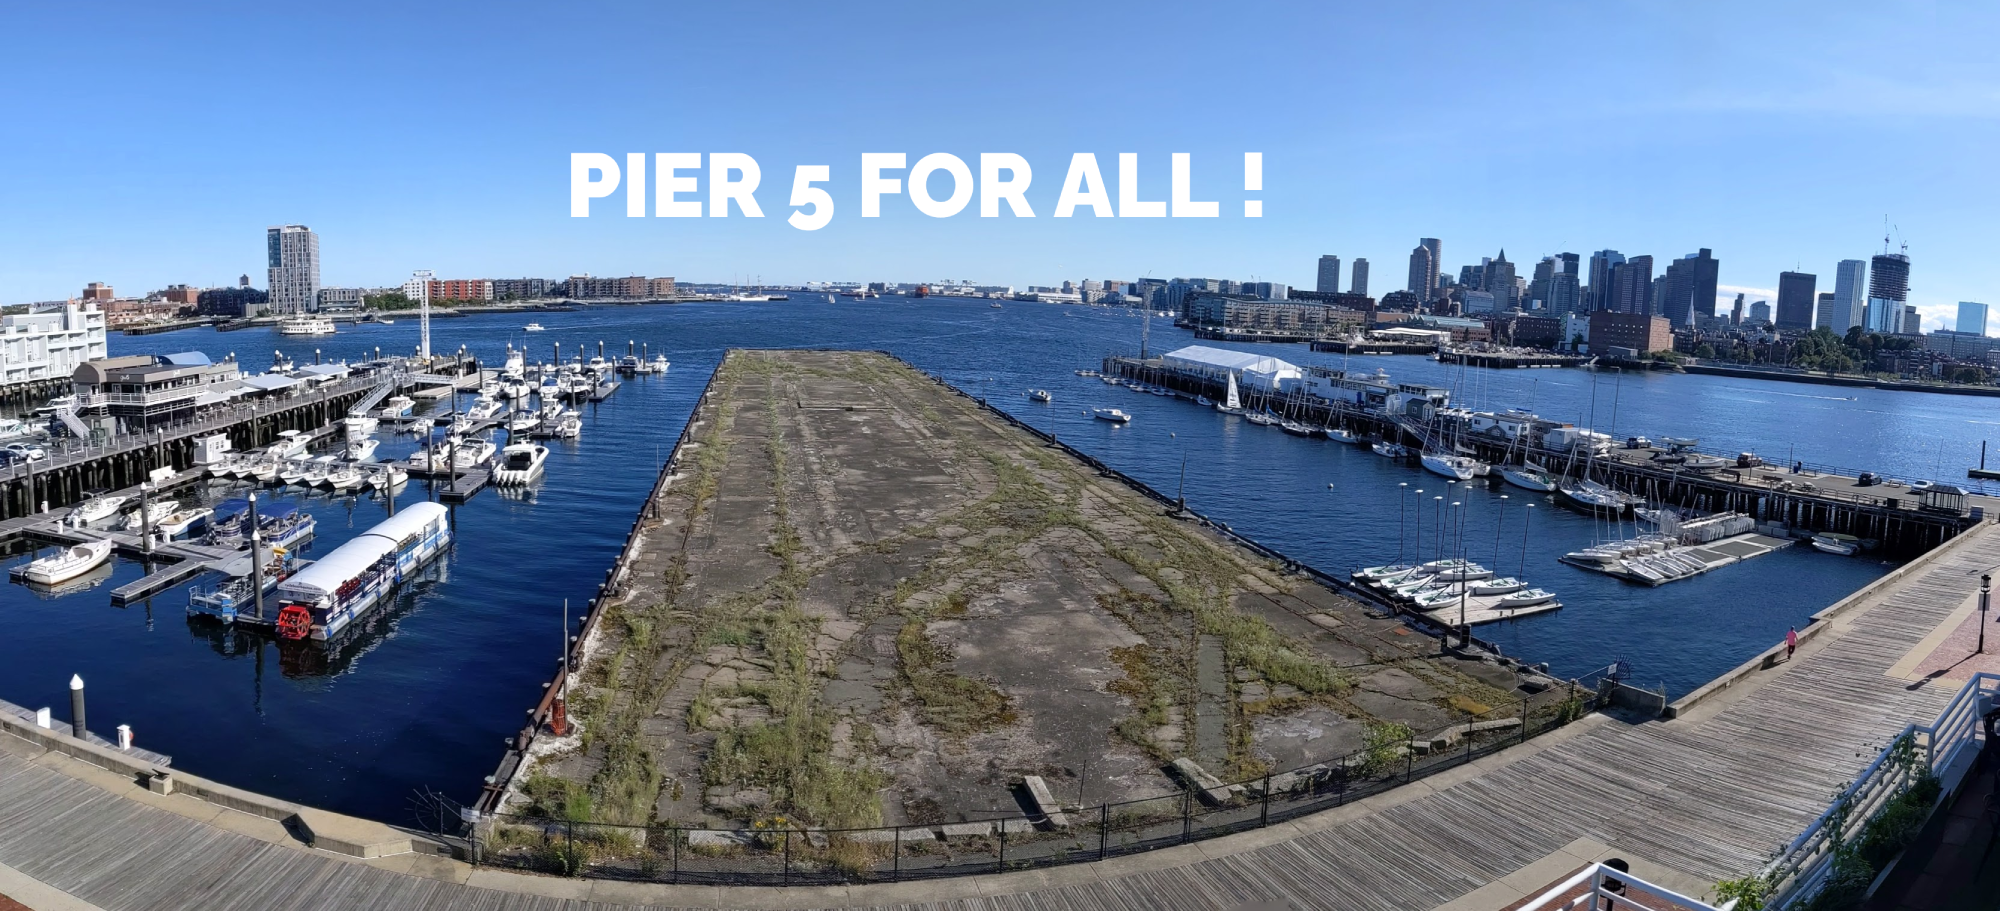 PIER 5 FOR ALL